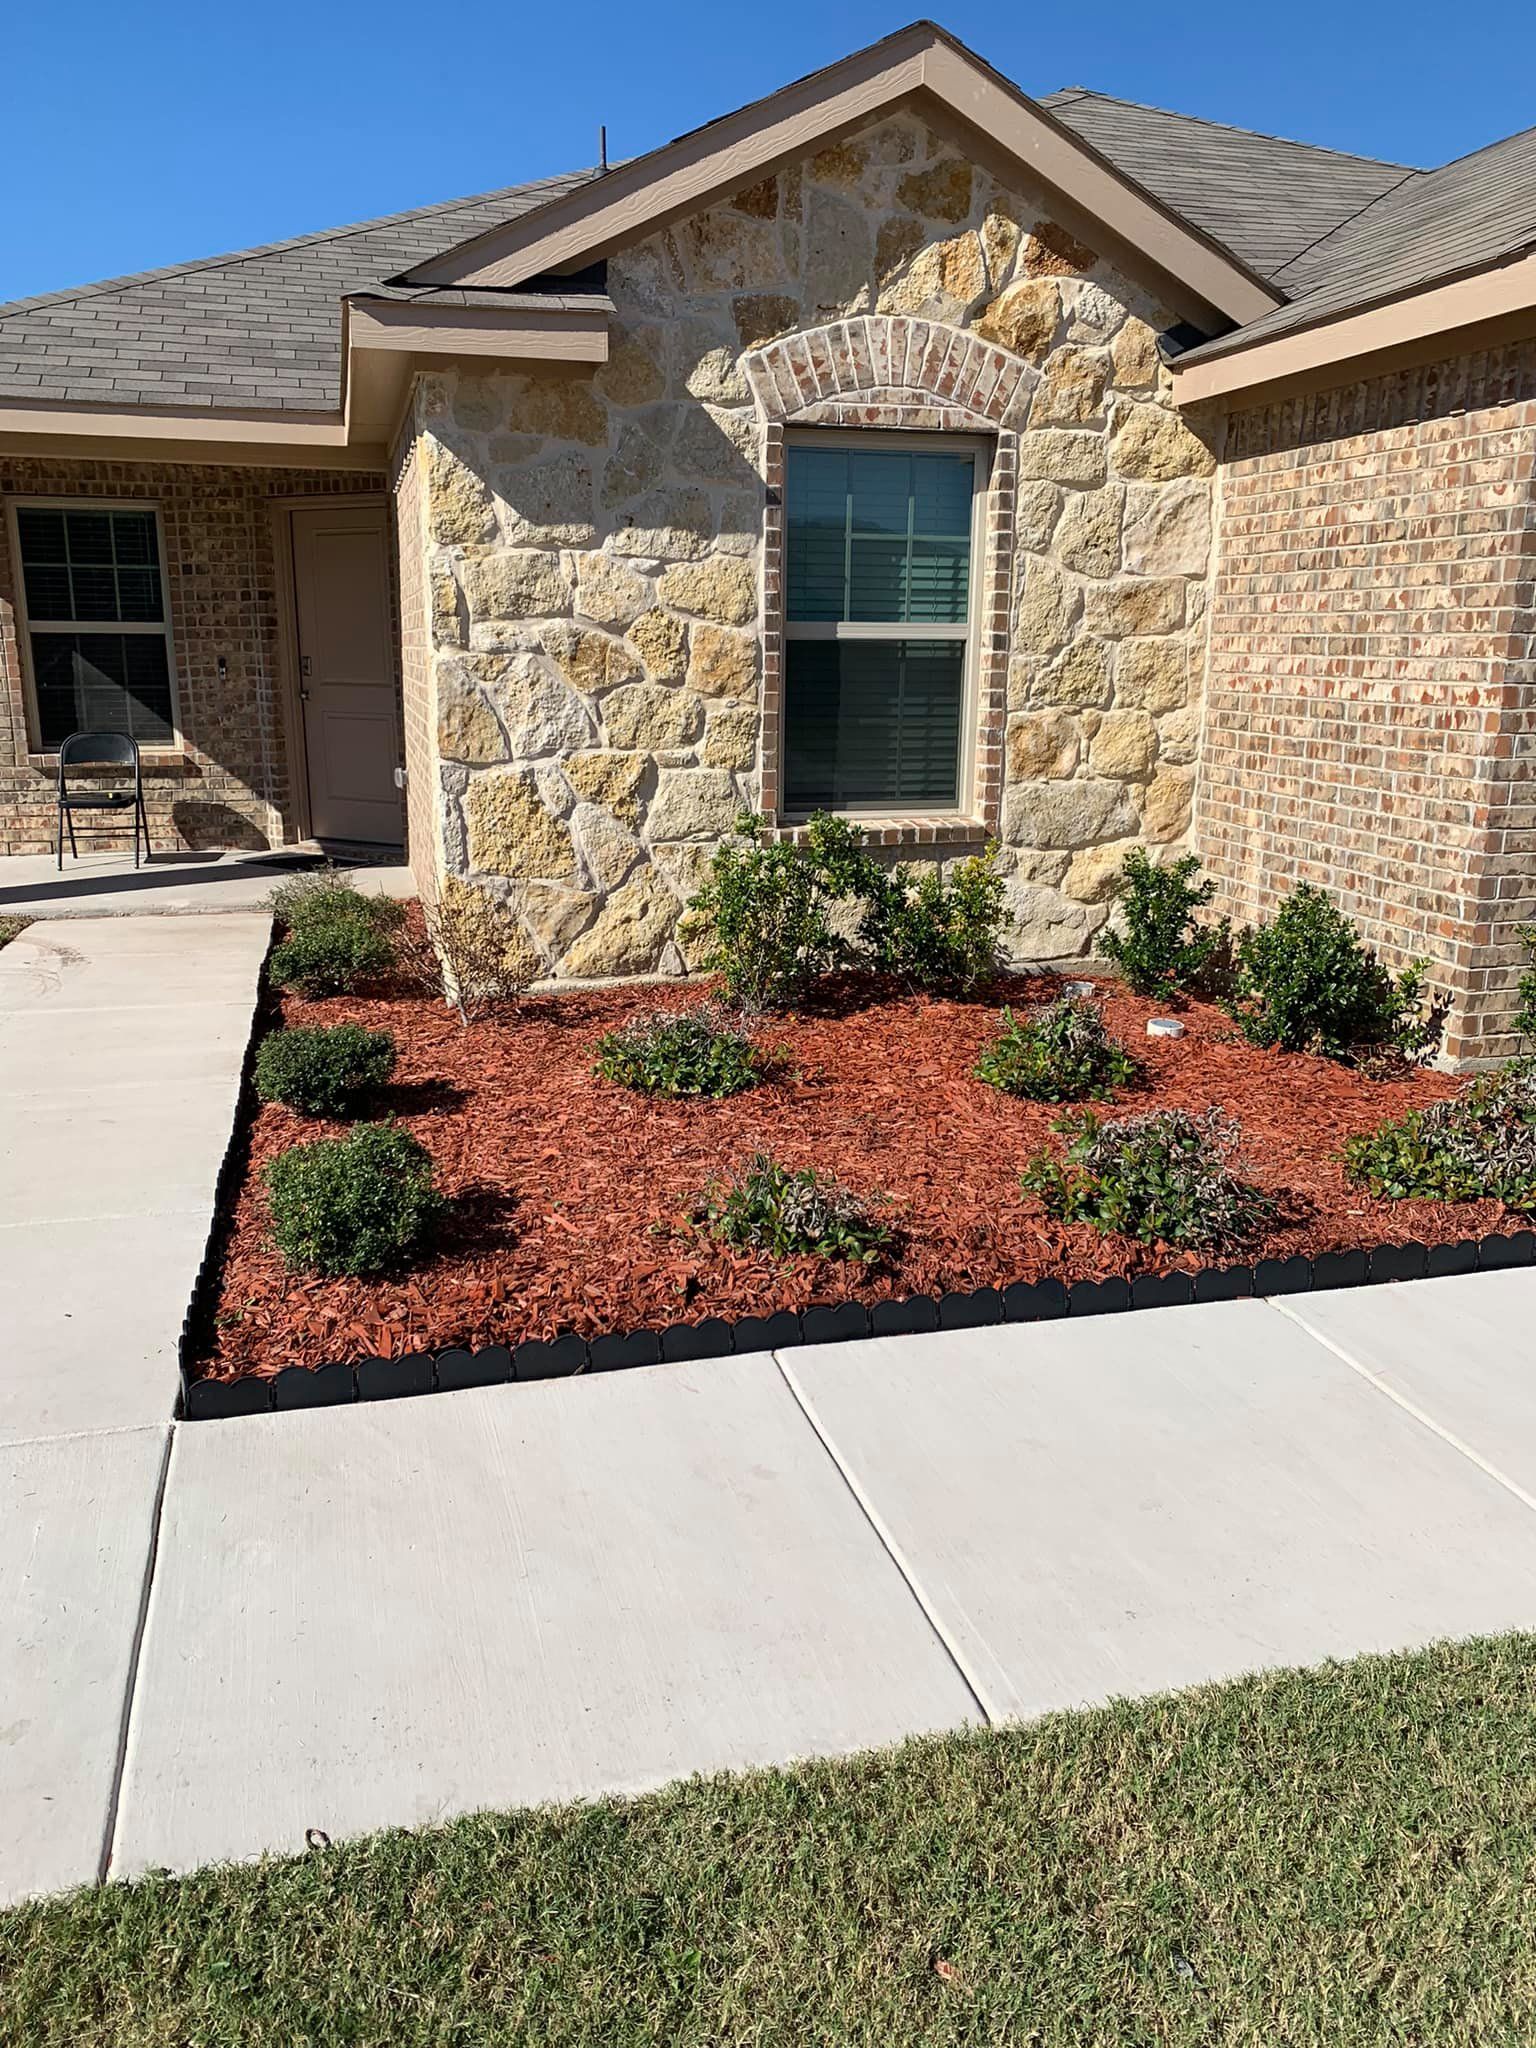 Landscaping for Grass Kickers Lawn Care and Landscaping in Dallas, TX